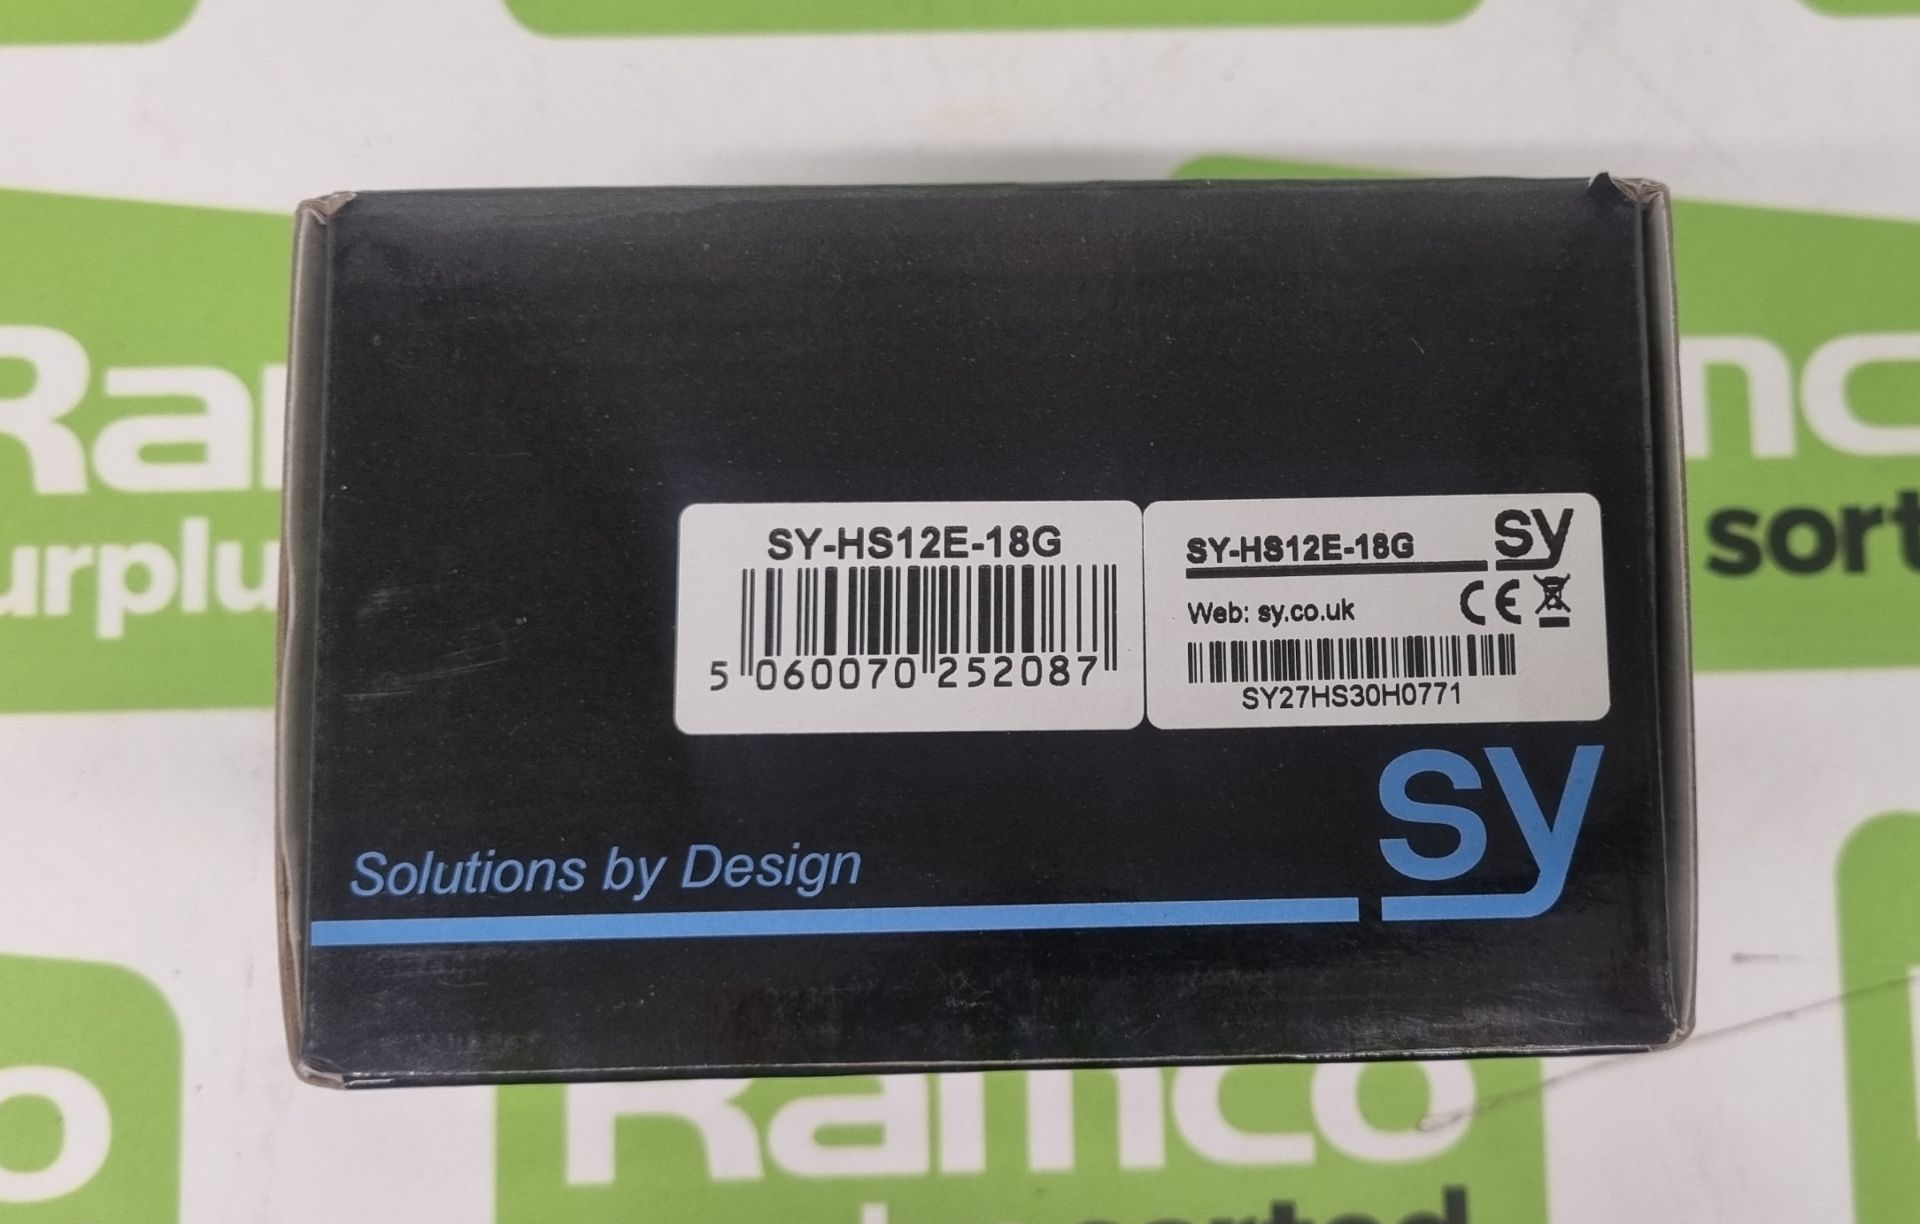 SY-HS12E-18G 1x2 HDMI 2.0 (18Gbps) splitter - Image 9 of 9